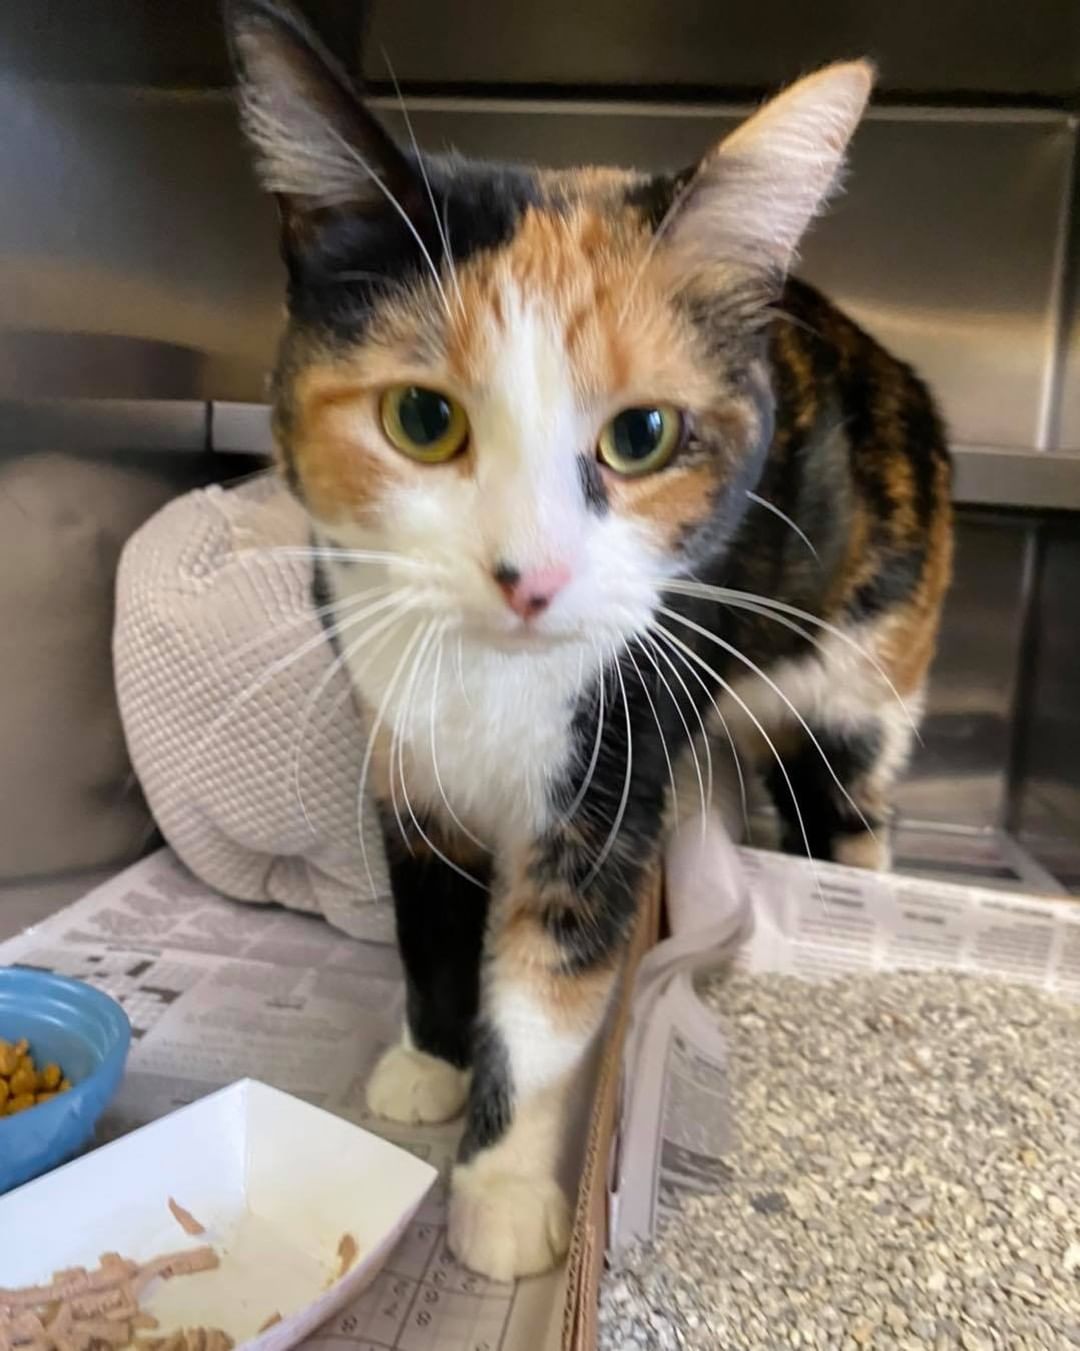 Do you know me? I’m a sweet girl with a pink tag less collar and no microchip. If you know me, let my parents know to call the shelter at 603-628-3544.